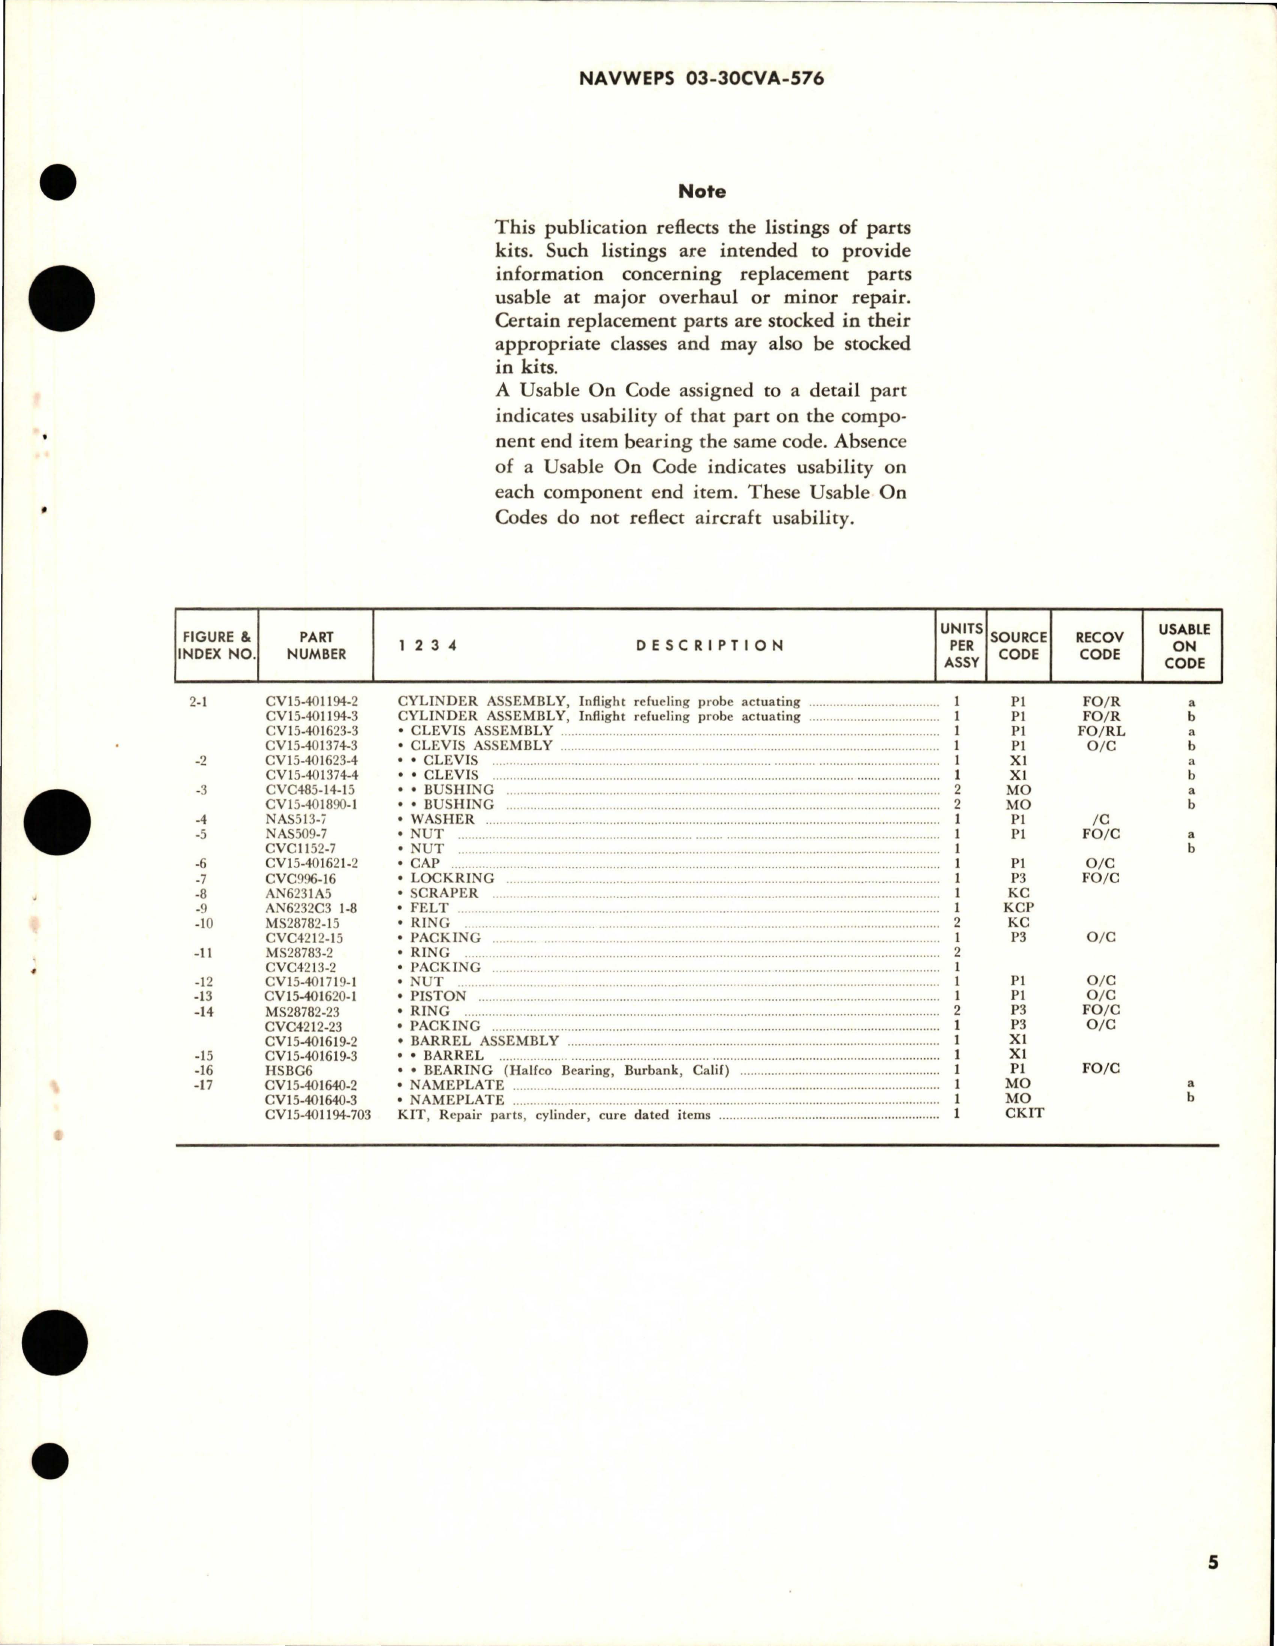 Sample page 5 from AirCorps Library document: Overhaul Instructions with Parts Breakdown for Inflight Refueling Probe Actuating Cylinder Assembly - CV15-401194-2, CV15-401194-3